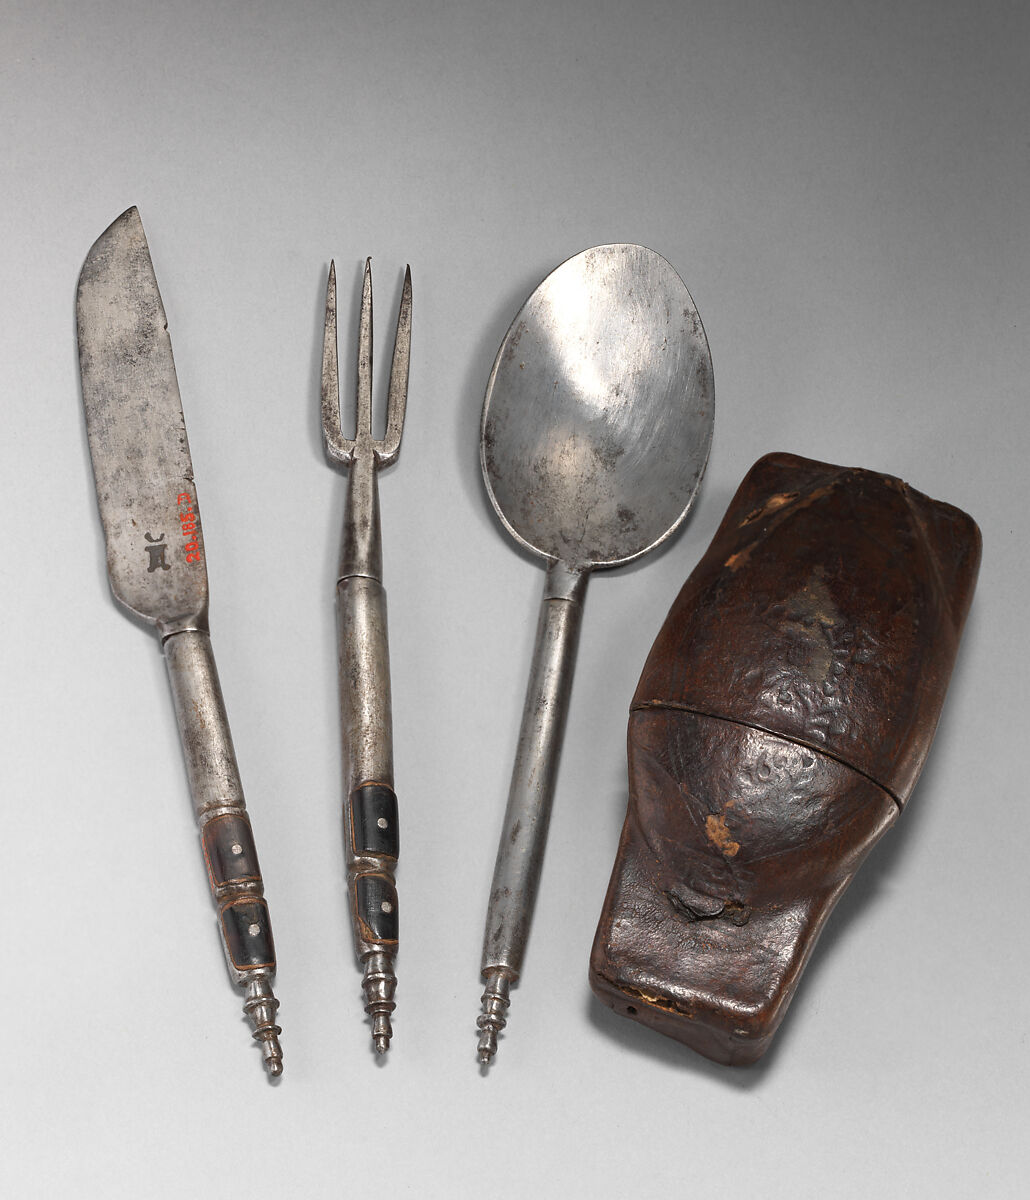 Knife, fork, and spoon in traveling case, Steel (?), tortoiseshell; leather case, Spanish 